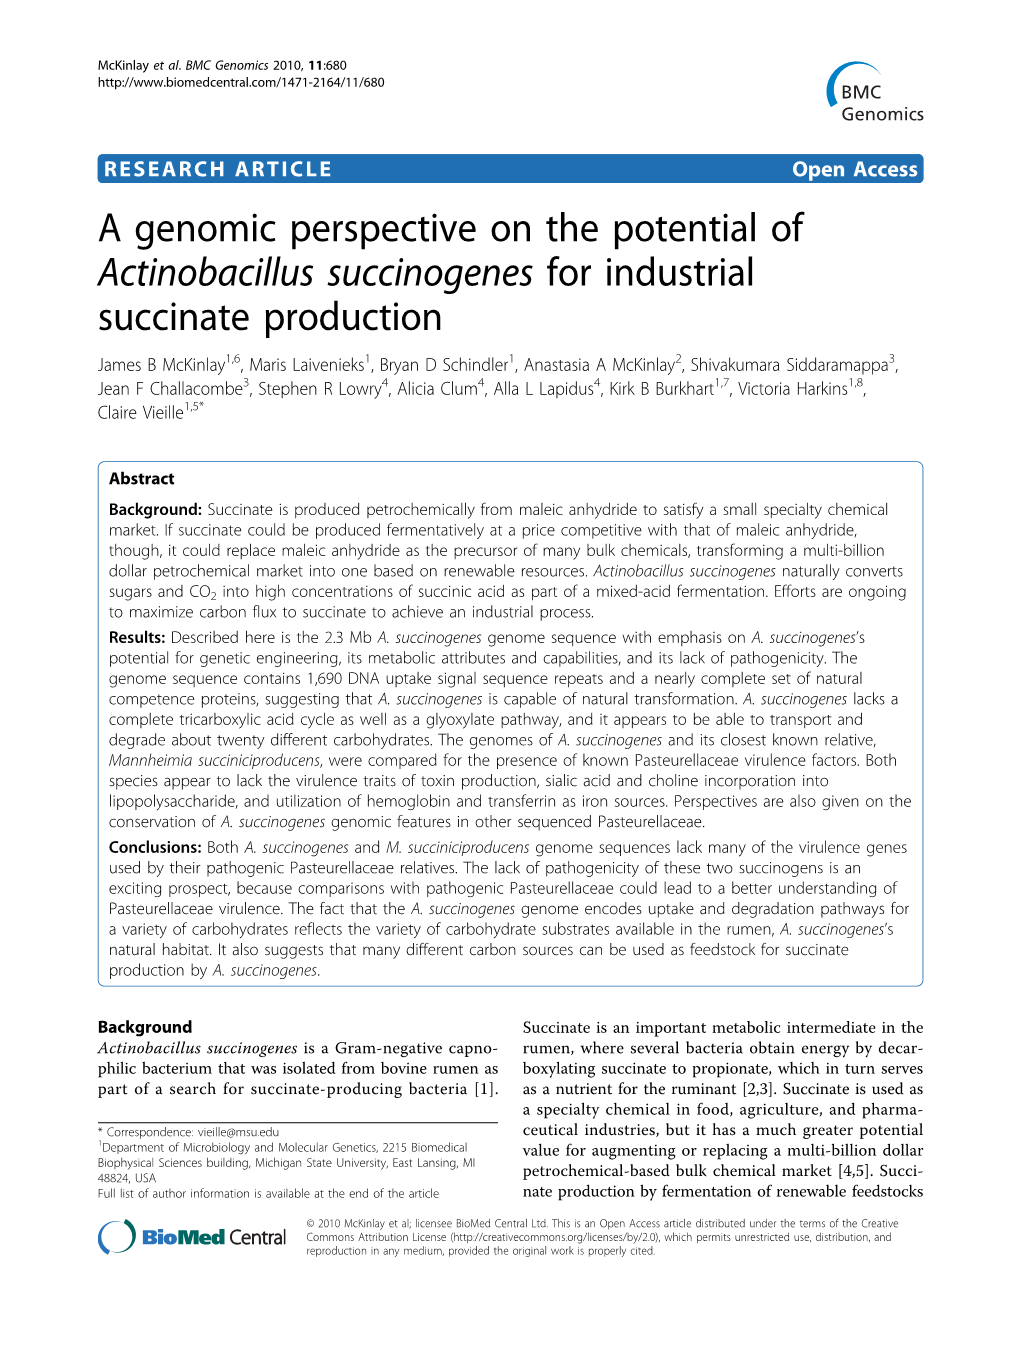 A Genomic Perspective on the Potential of Actinobacillus